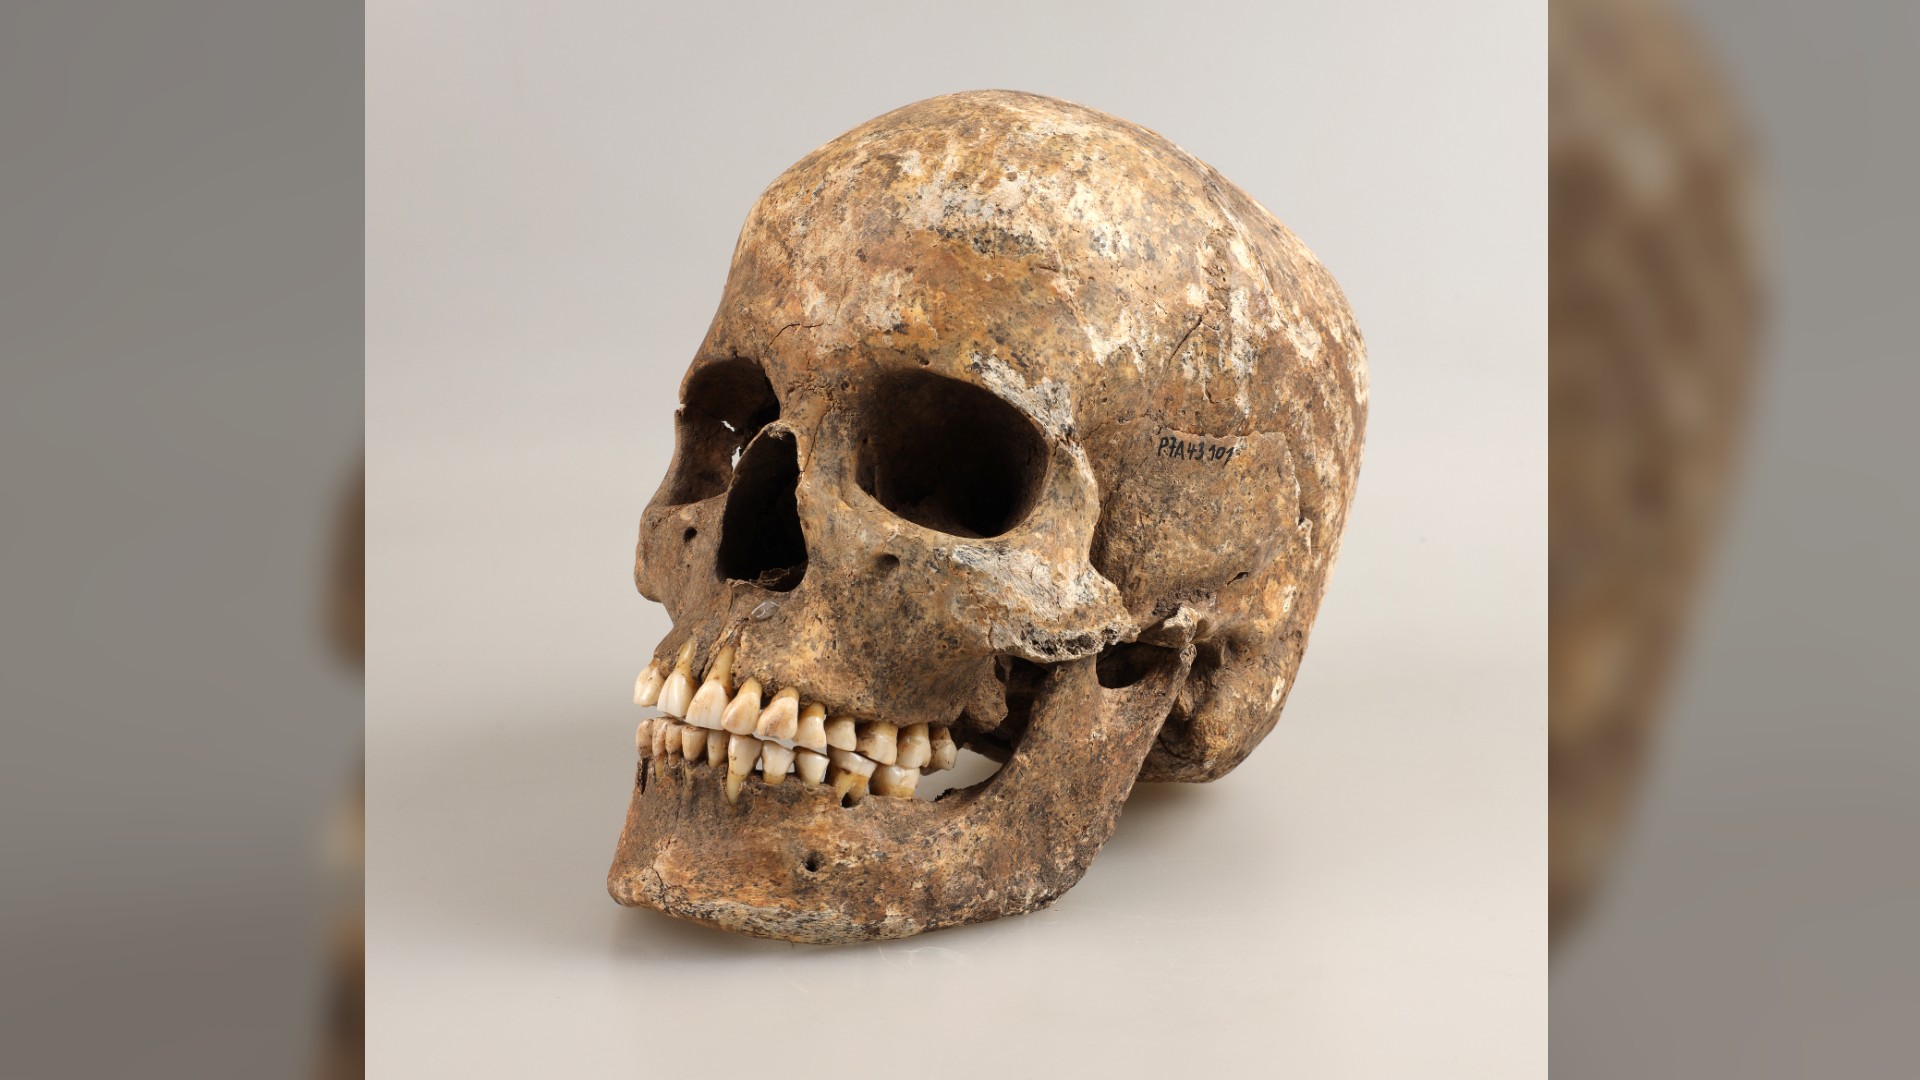 Skull of a woman from Bronze Age Bohemia discovered in Mikulovice near Pardubice, Czech Republic.